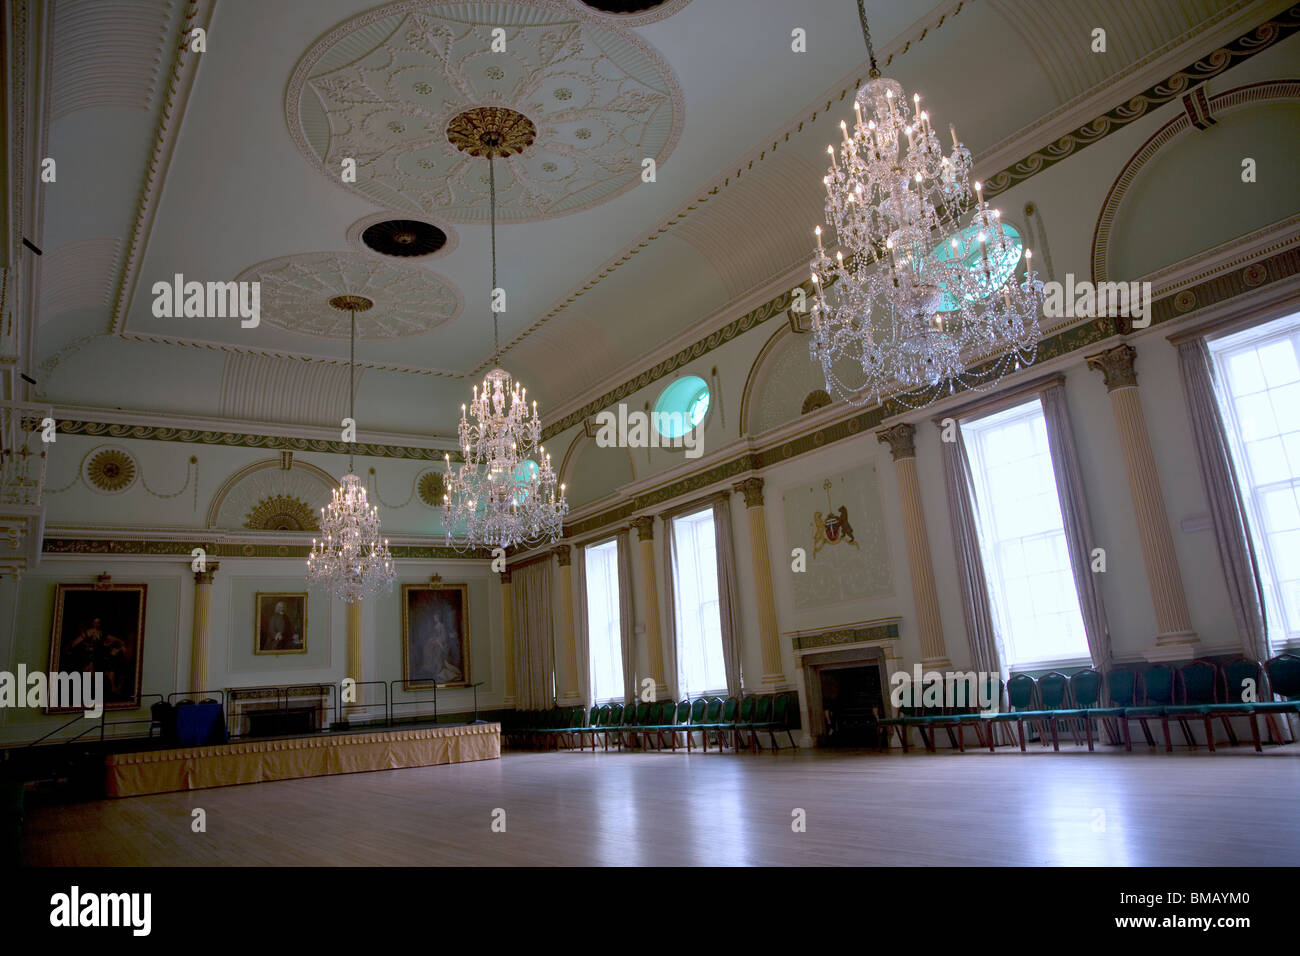 Ballroom with chandeliers, Guildhall, Bath Stock Photo